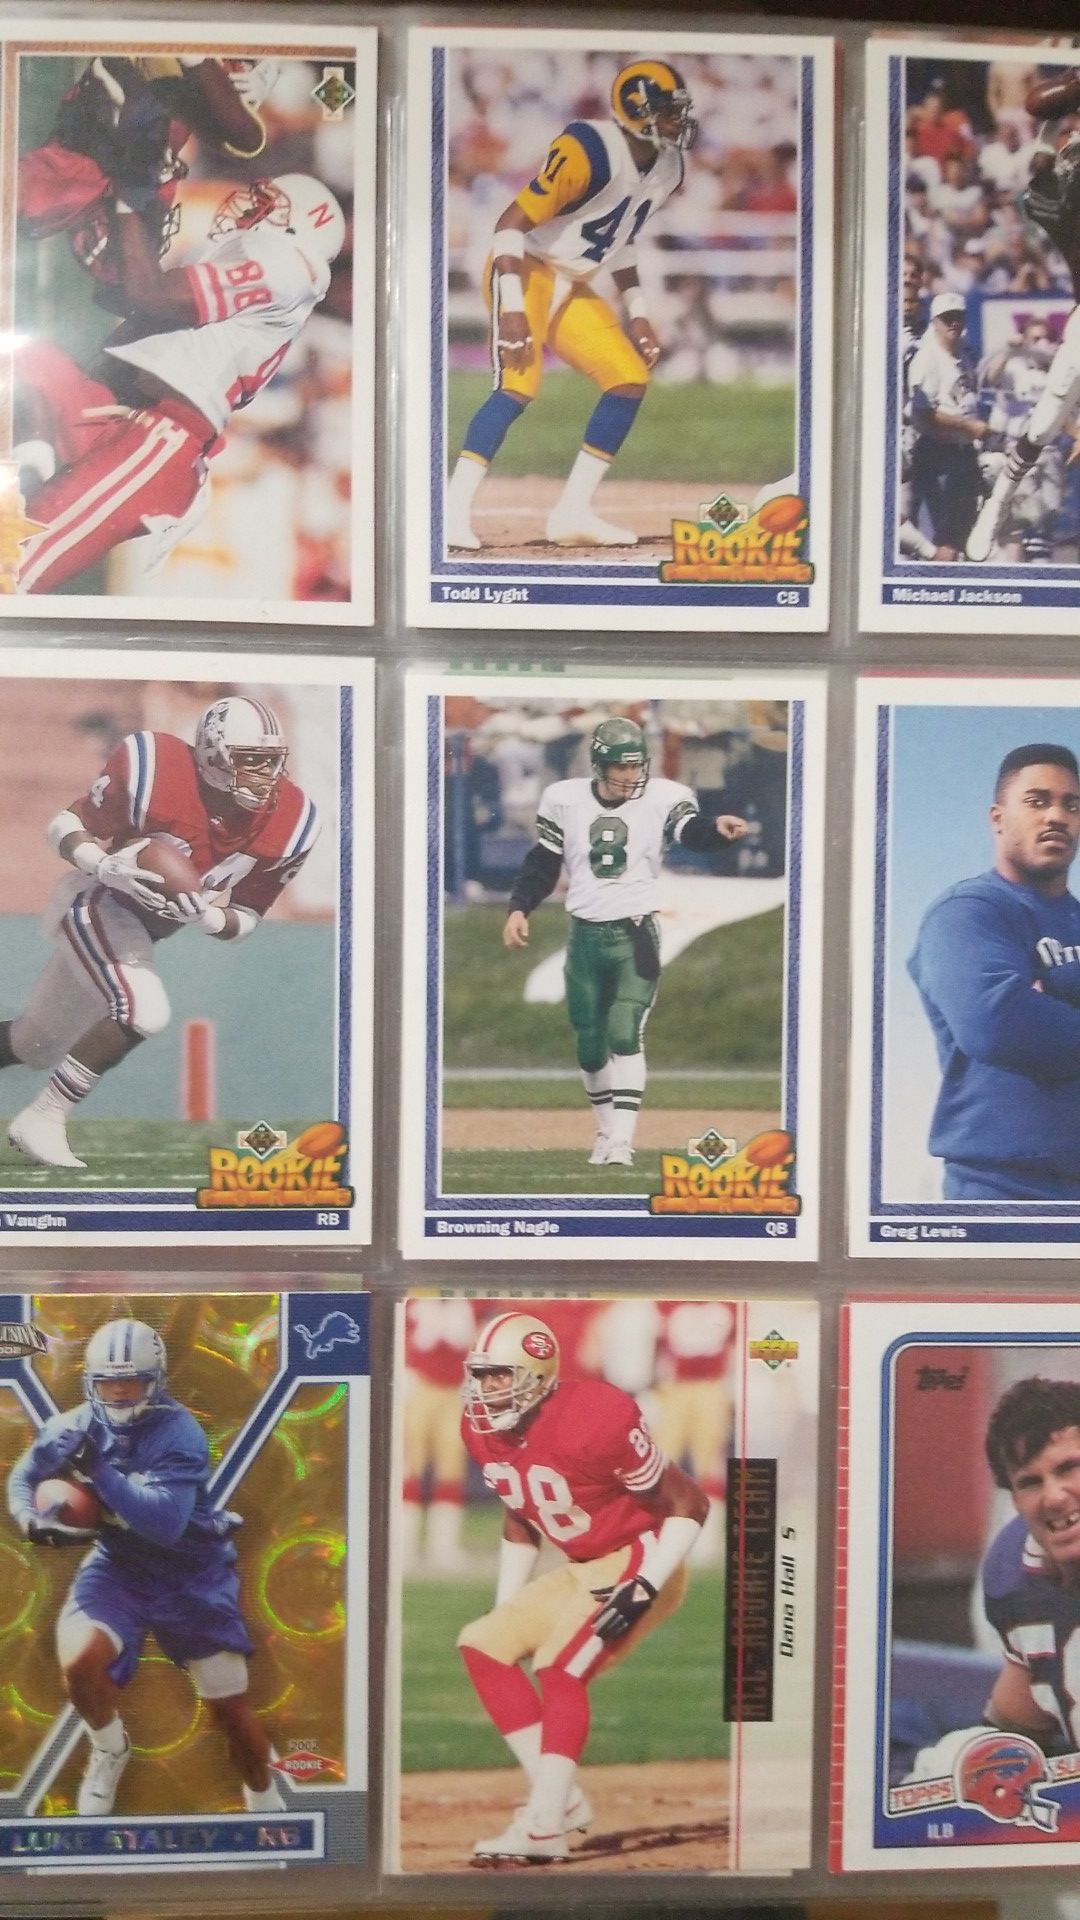 Over 250 Rookie Sports cards in excellent condition